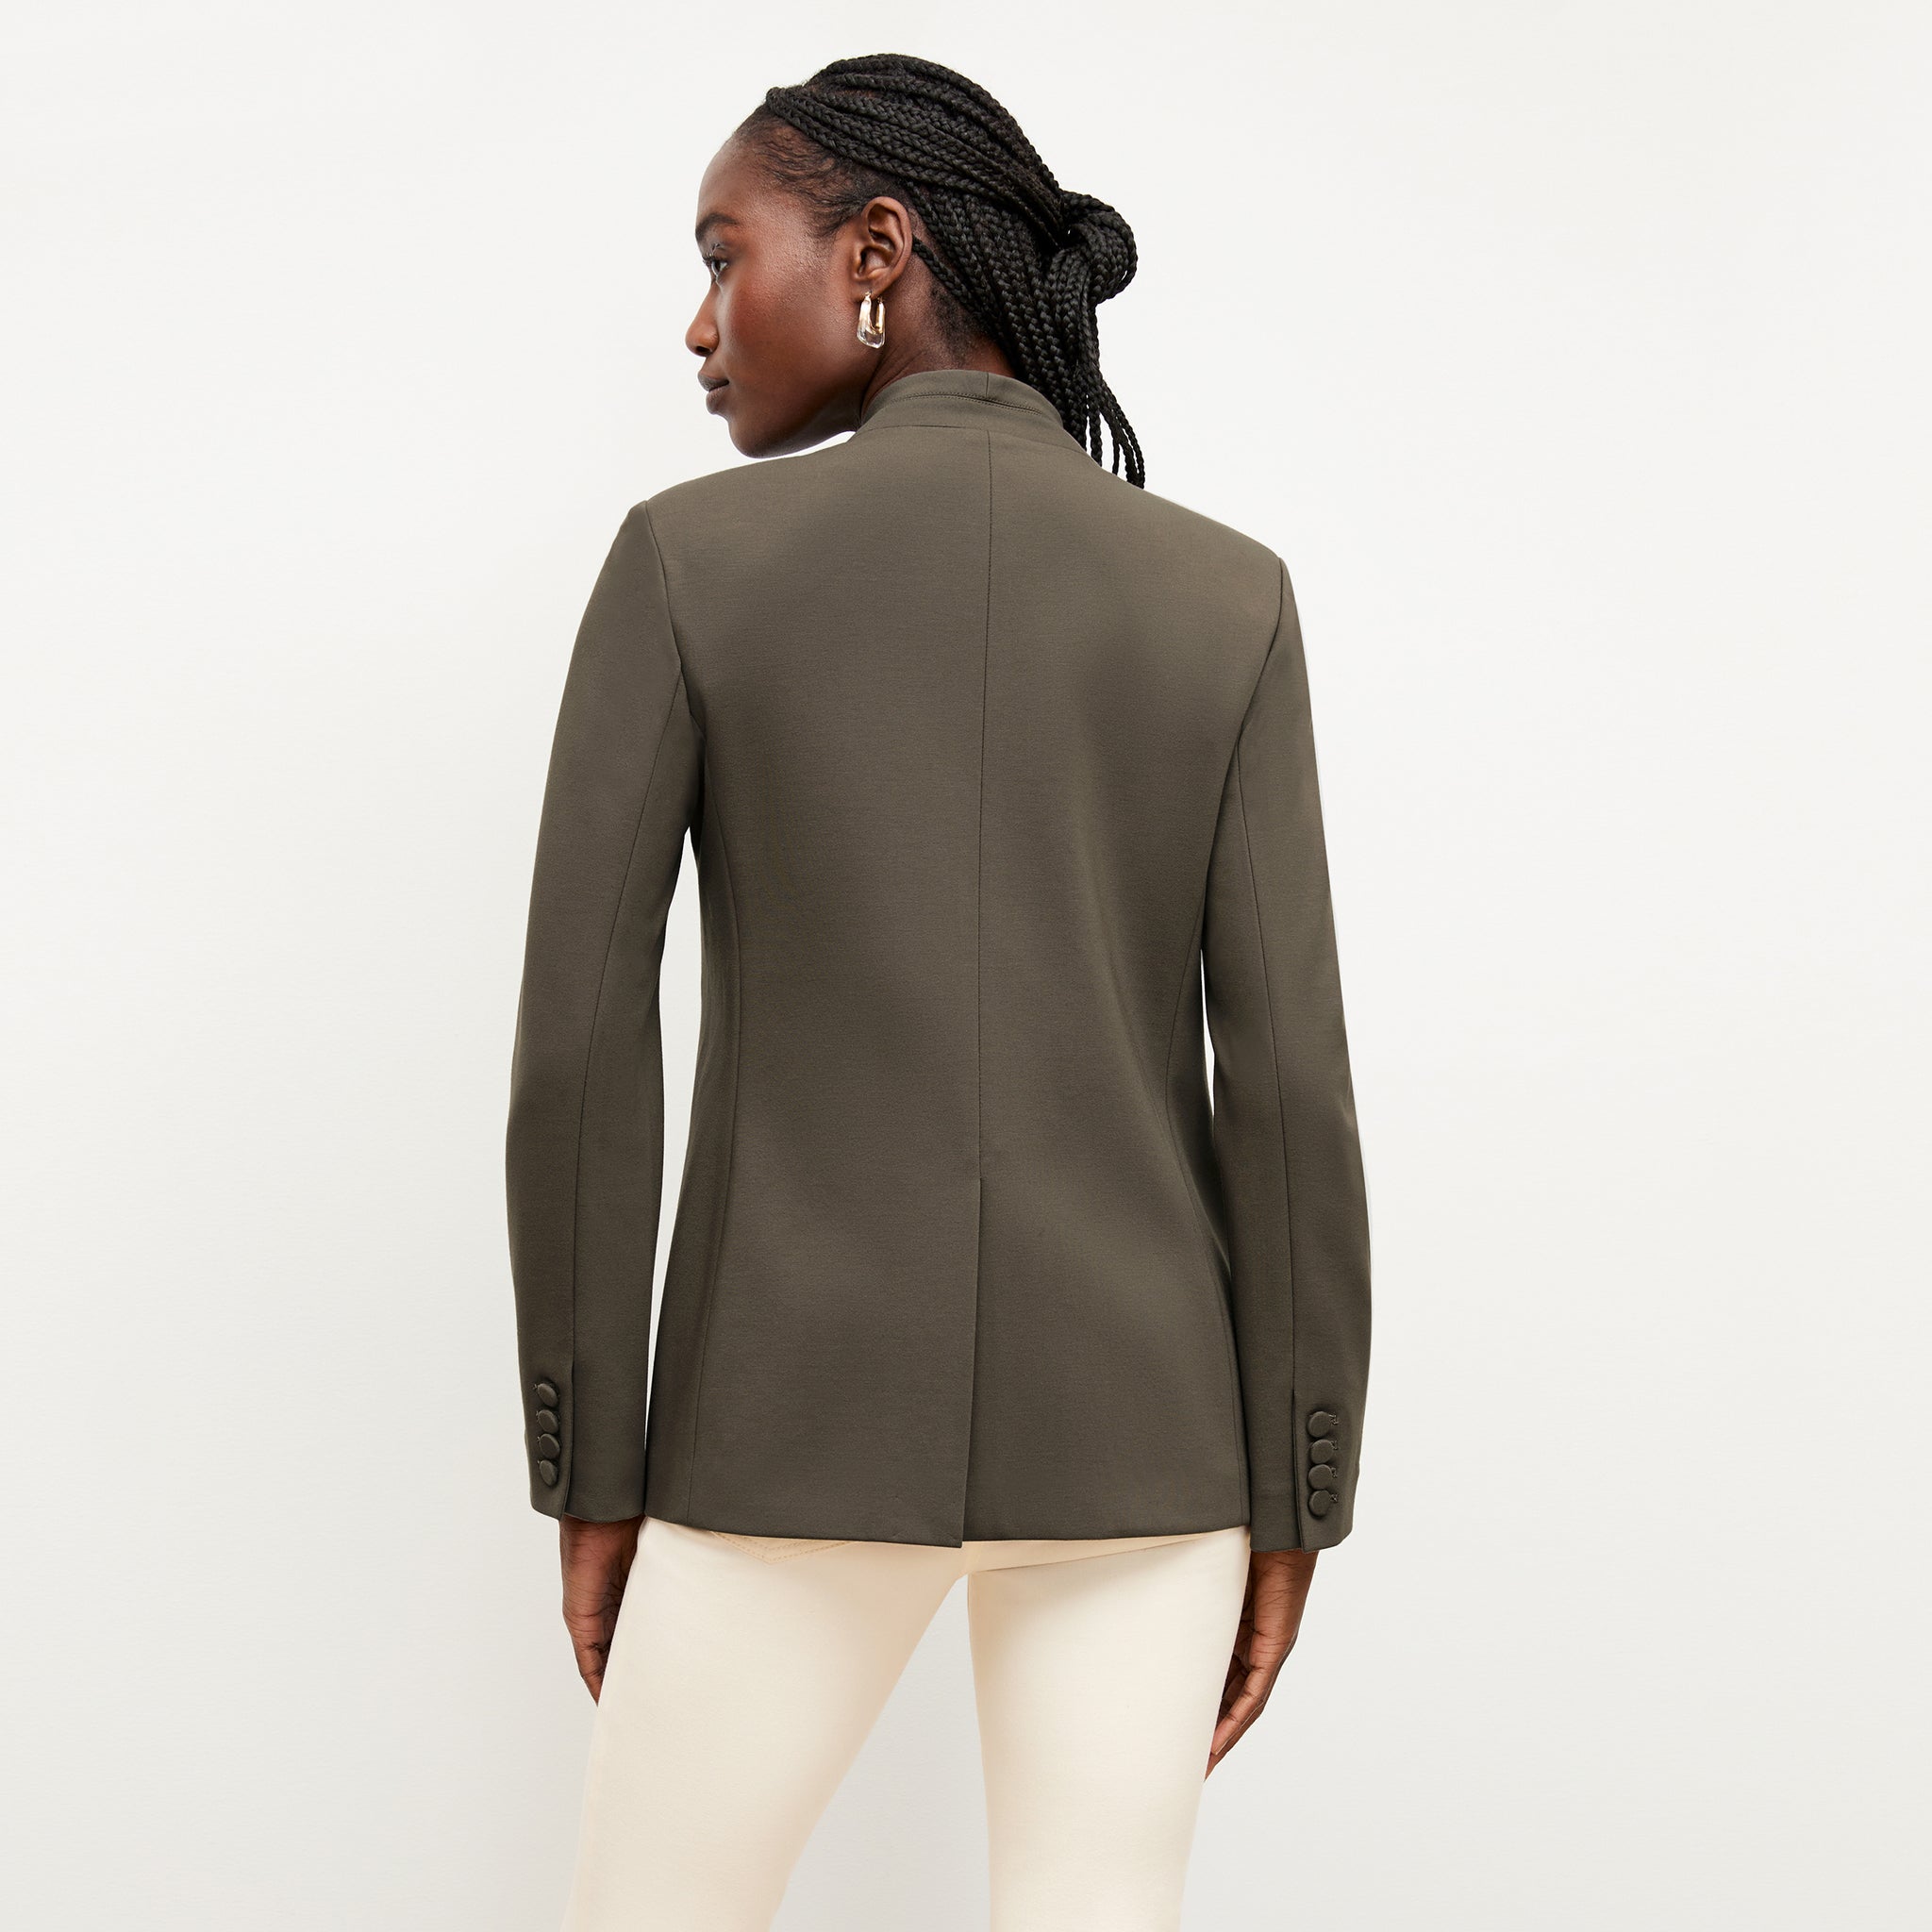 back image of a woman wearing the janette jacket in ash